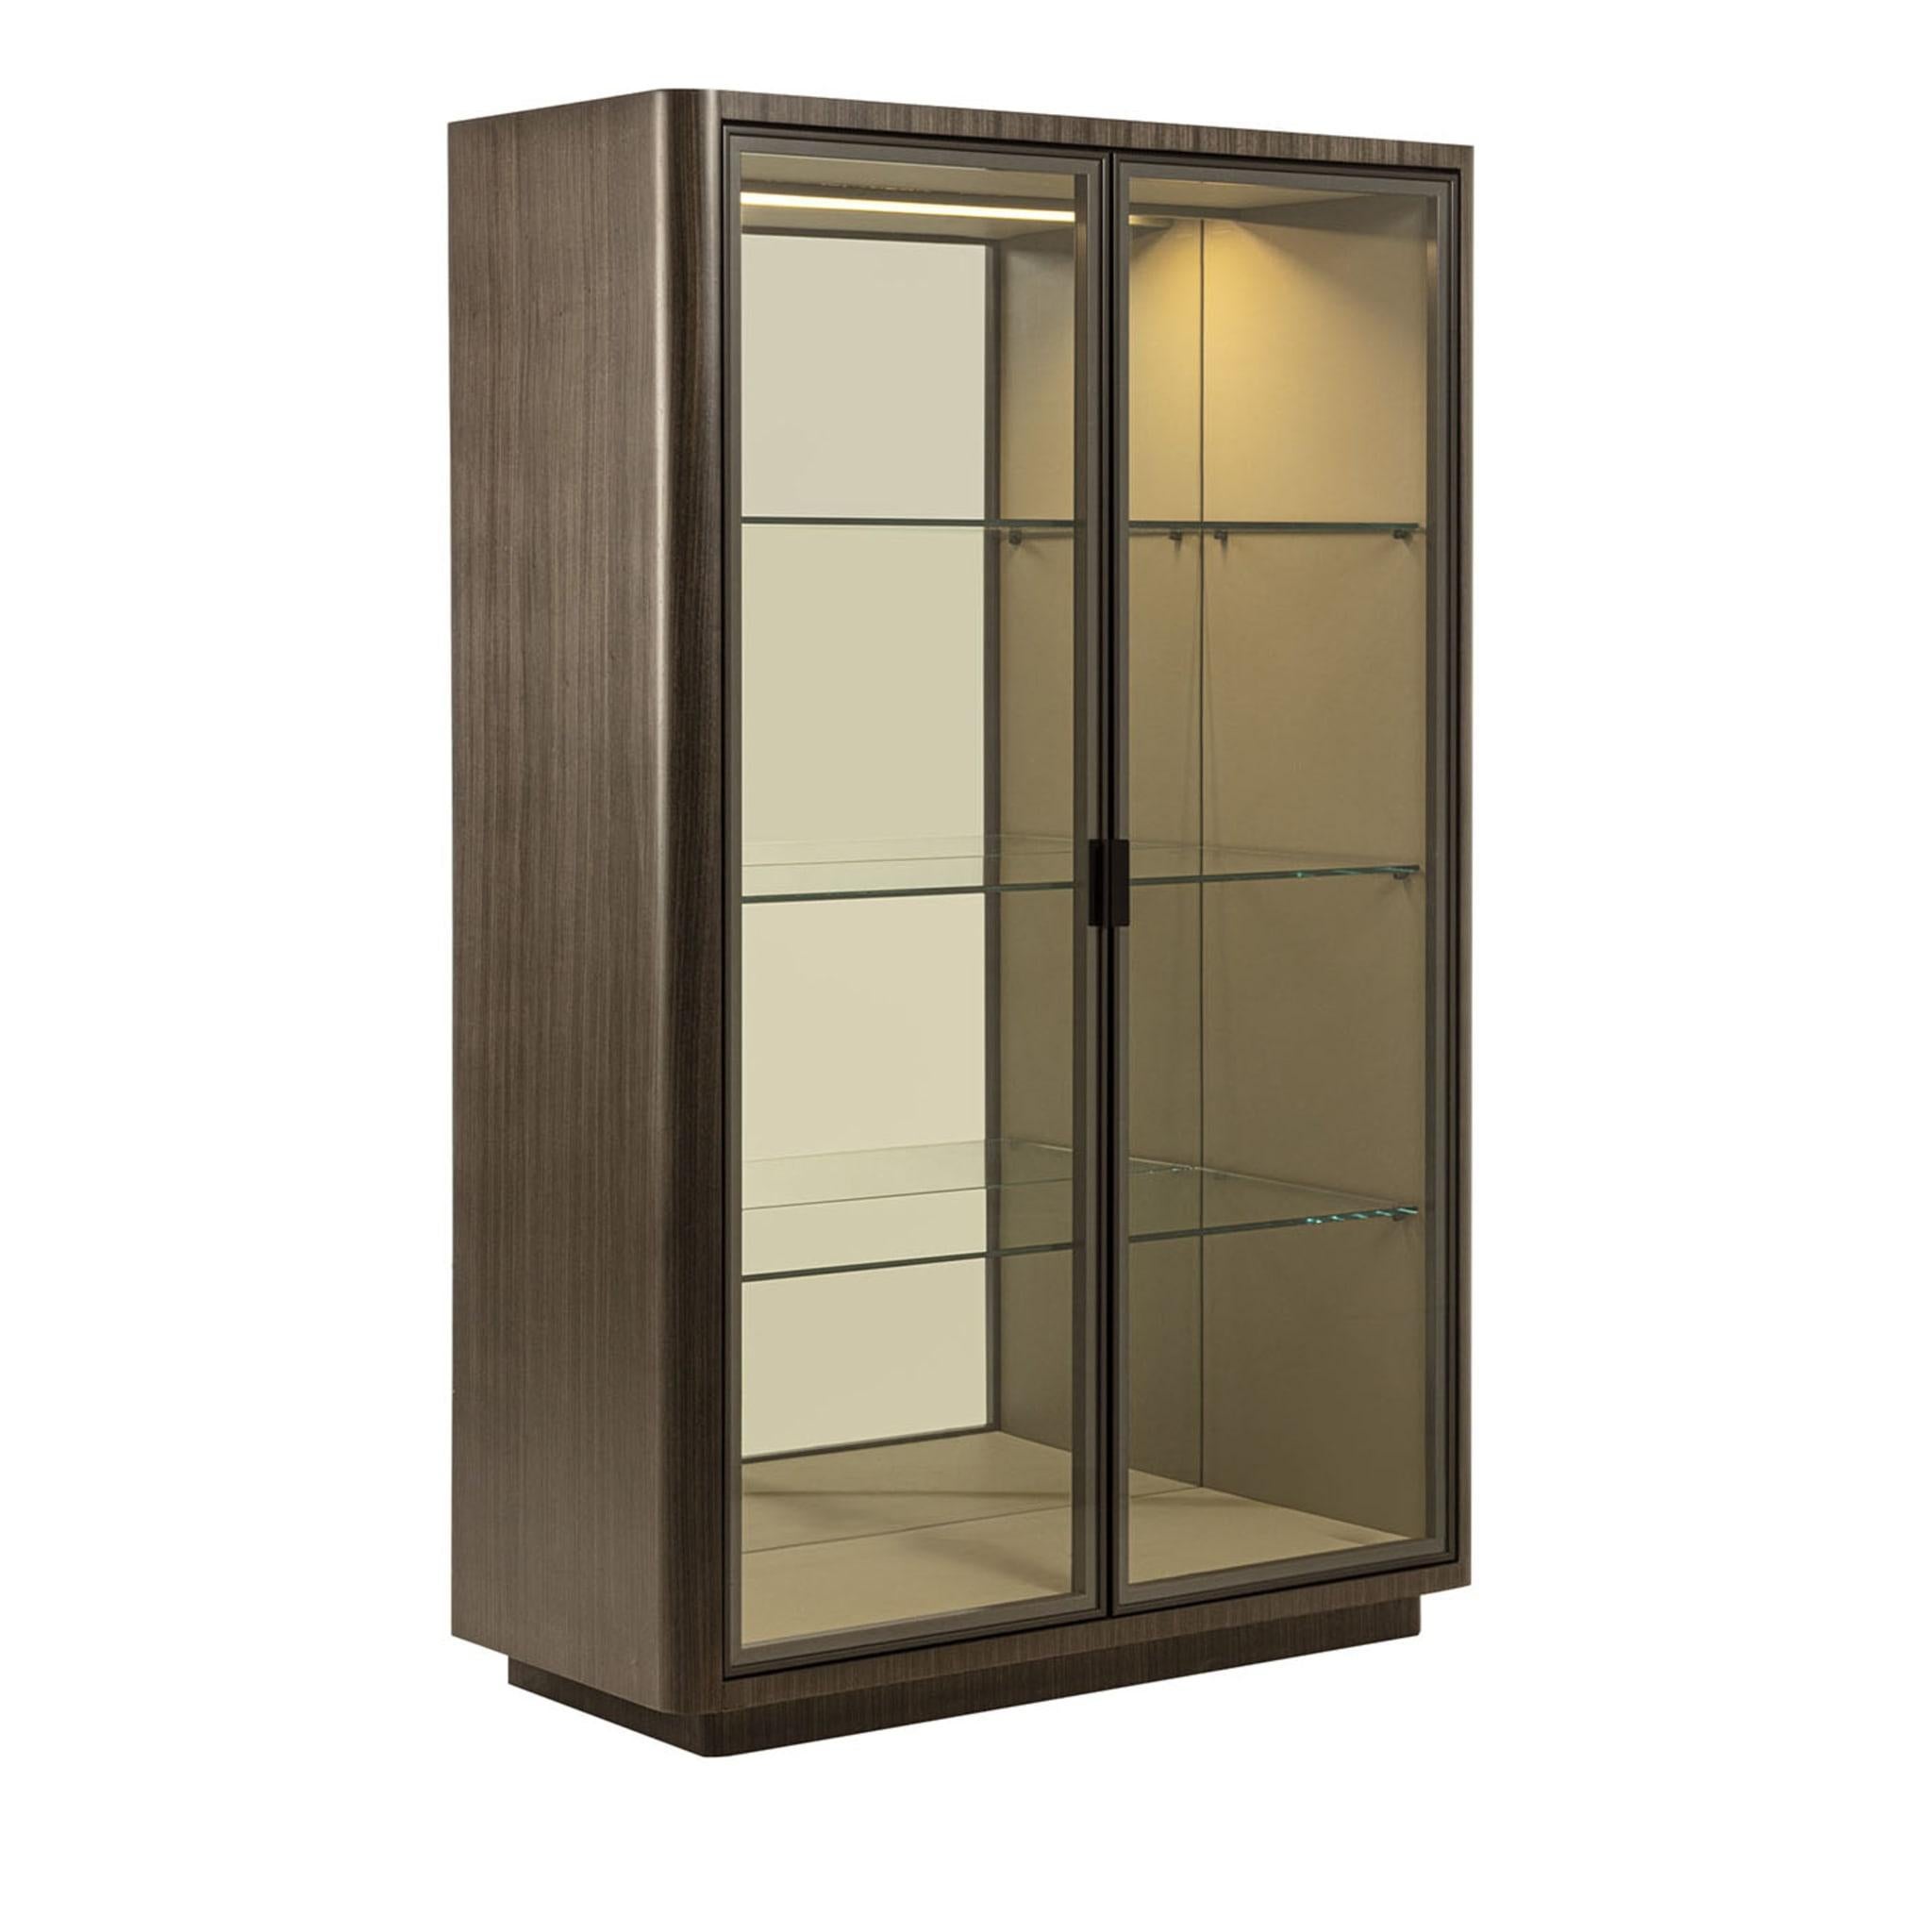 Glass cabinet with an elegant linear design. The external structure is embellished by the covering in dark Tay and by the detail of the rounded corners. The interior is characterized by the quality of the details, internal structure covered in